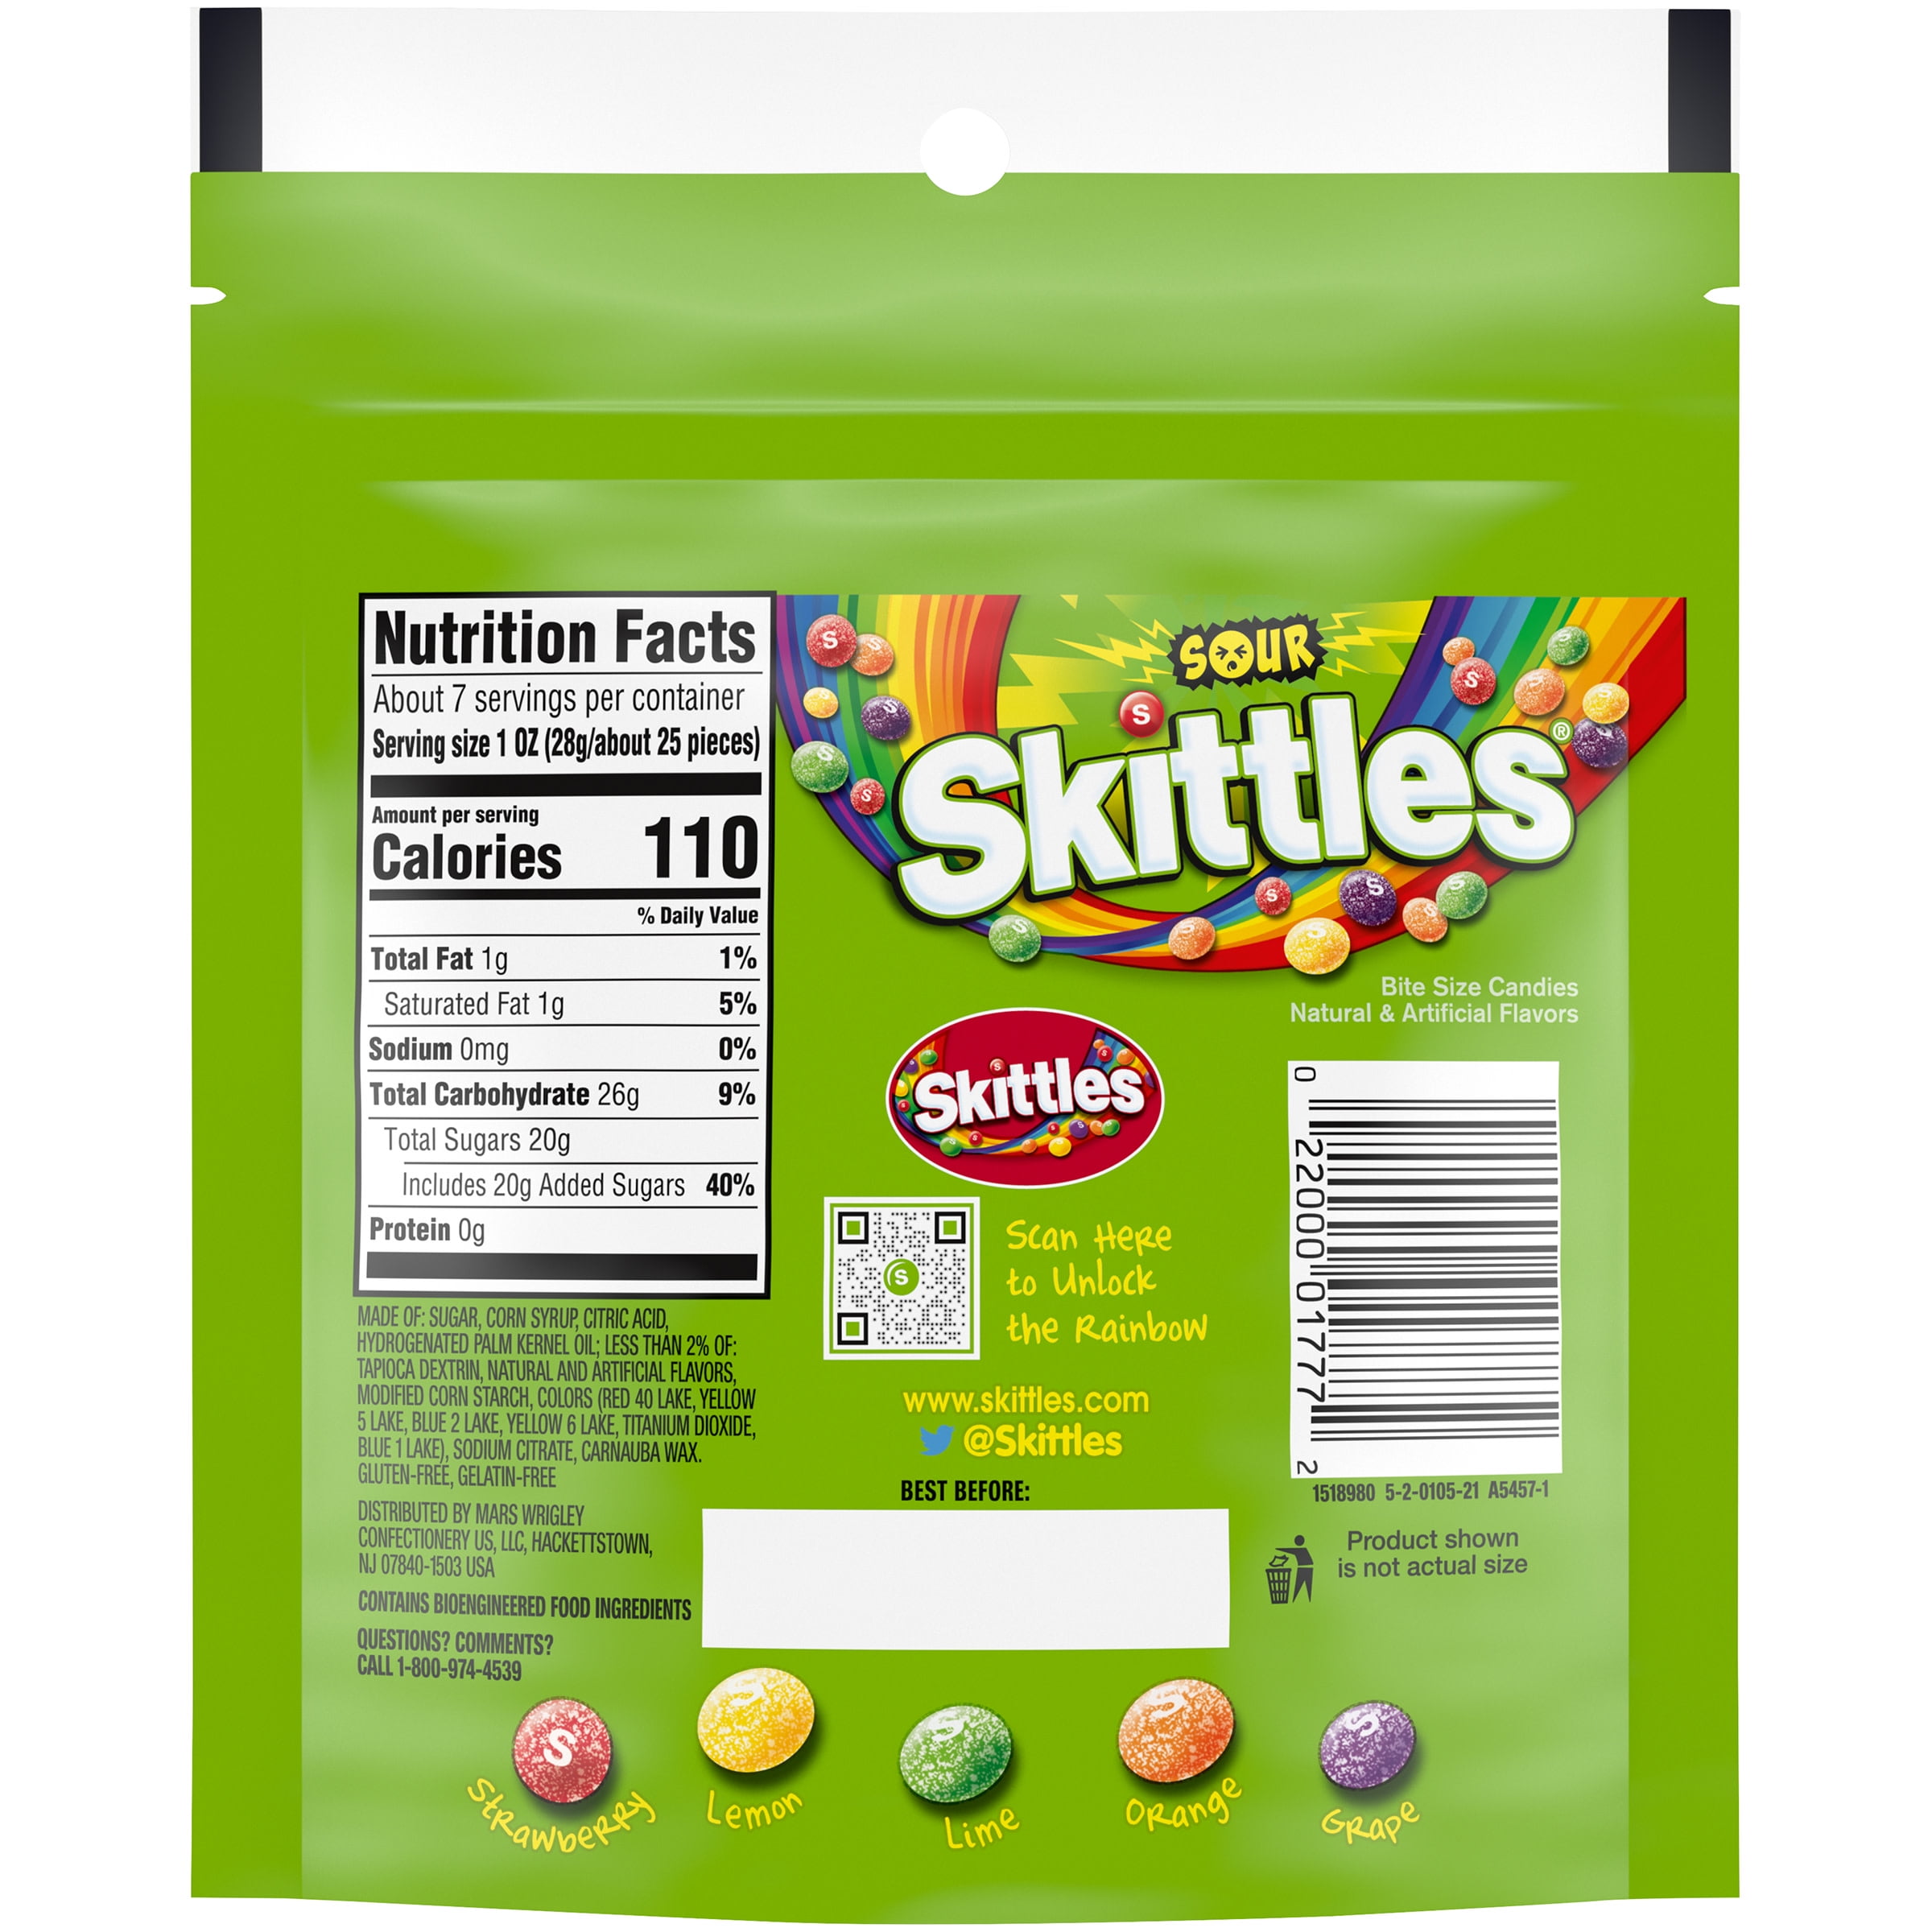 Skittles Nutrition Facts Label